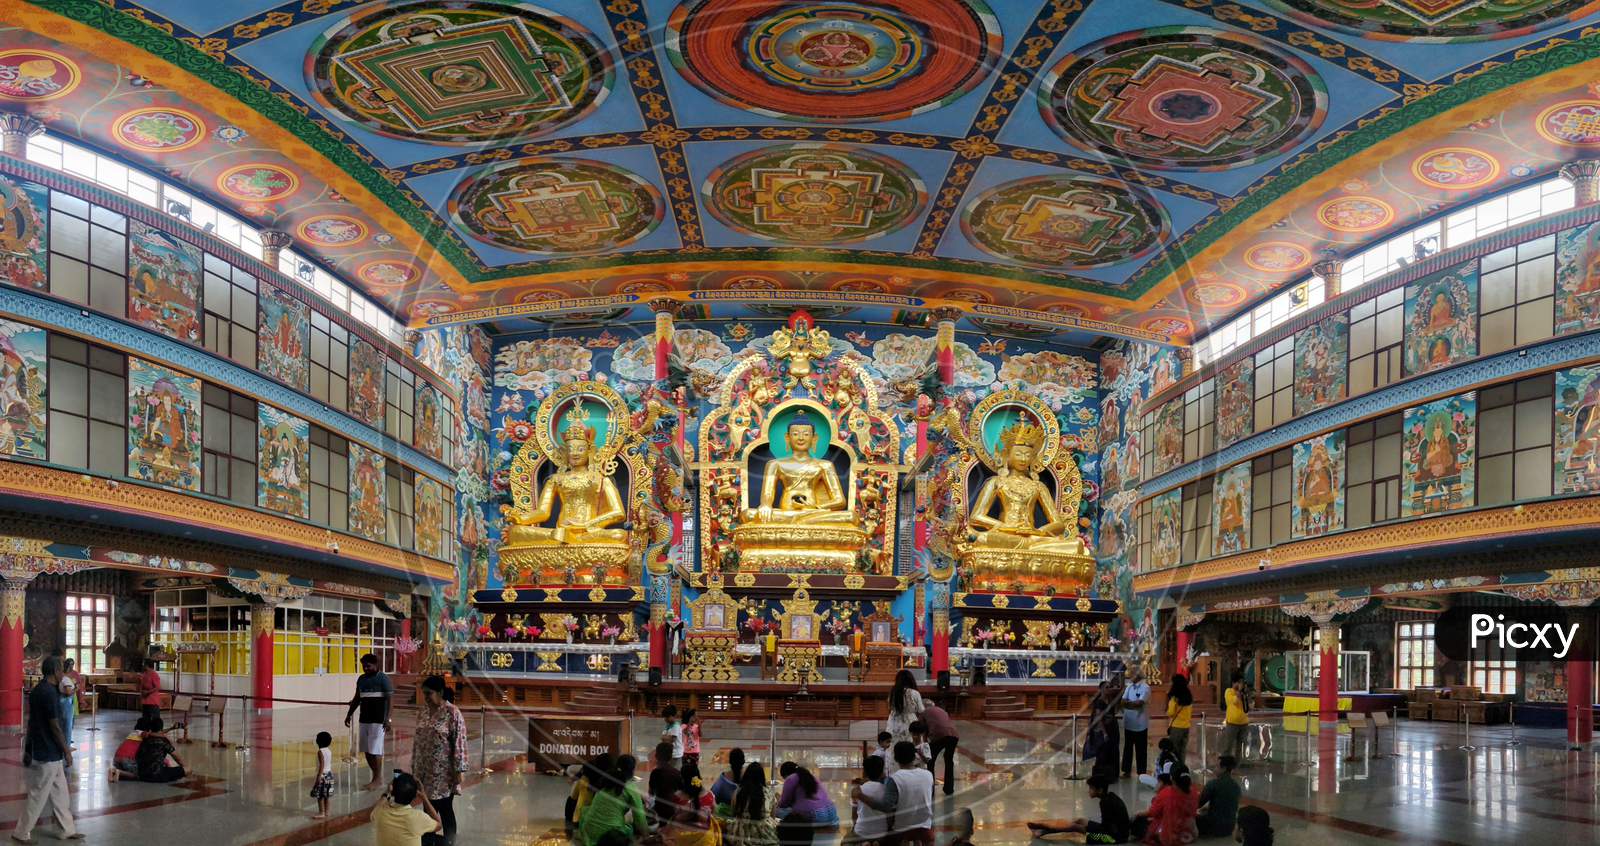 July 8, 2019 - Karnataka, India: Panorama Of Interior Of Namdroling Monastery In Coorg District, Karnataka, India. It Is Also Known As Golden Temple And Is A Buddhist Monastery. Statue Of Buddha.